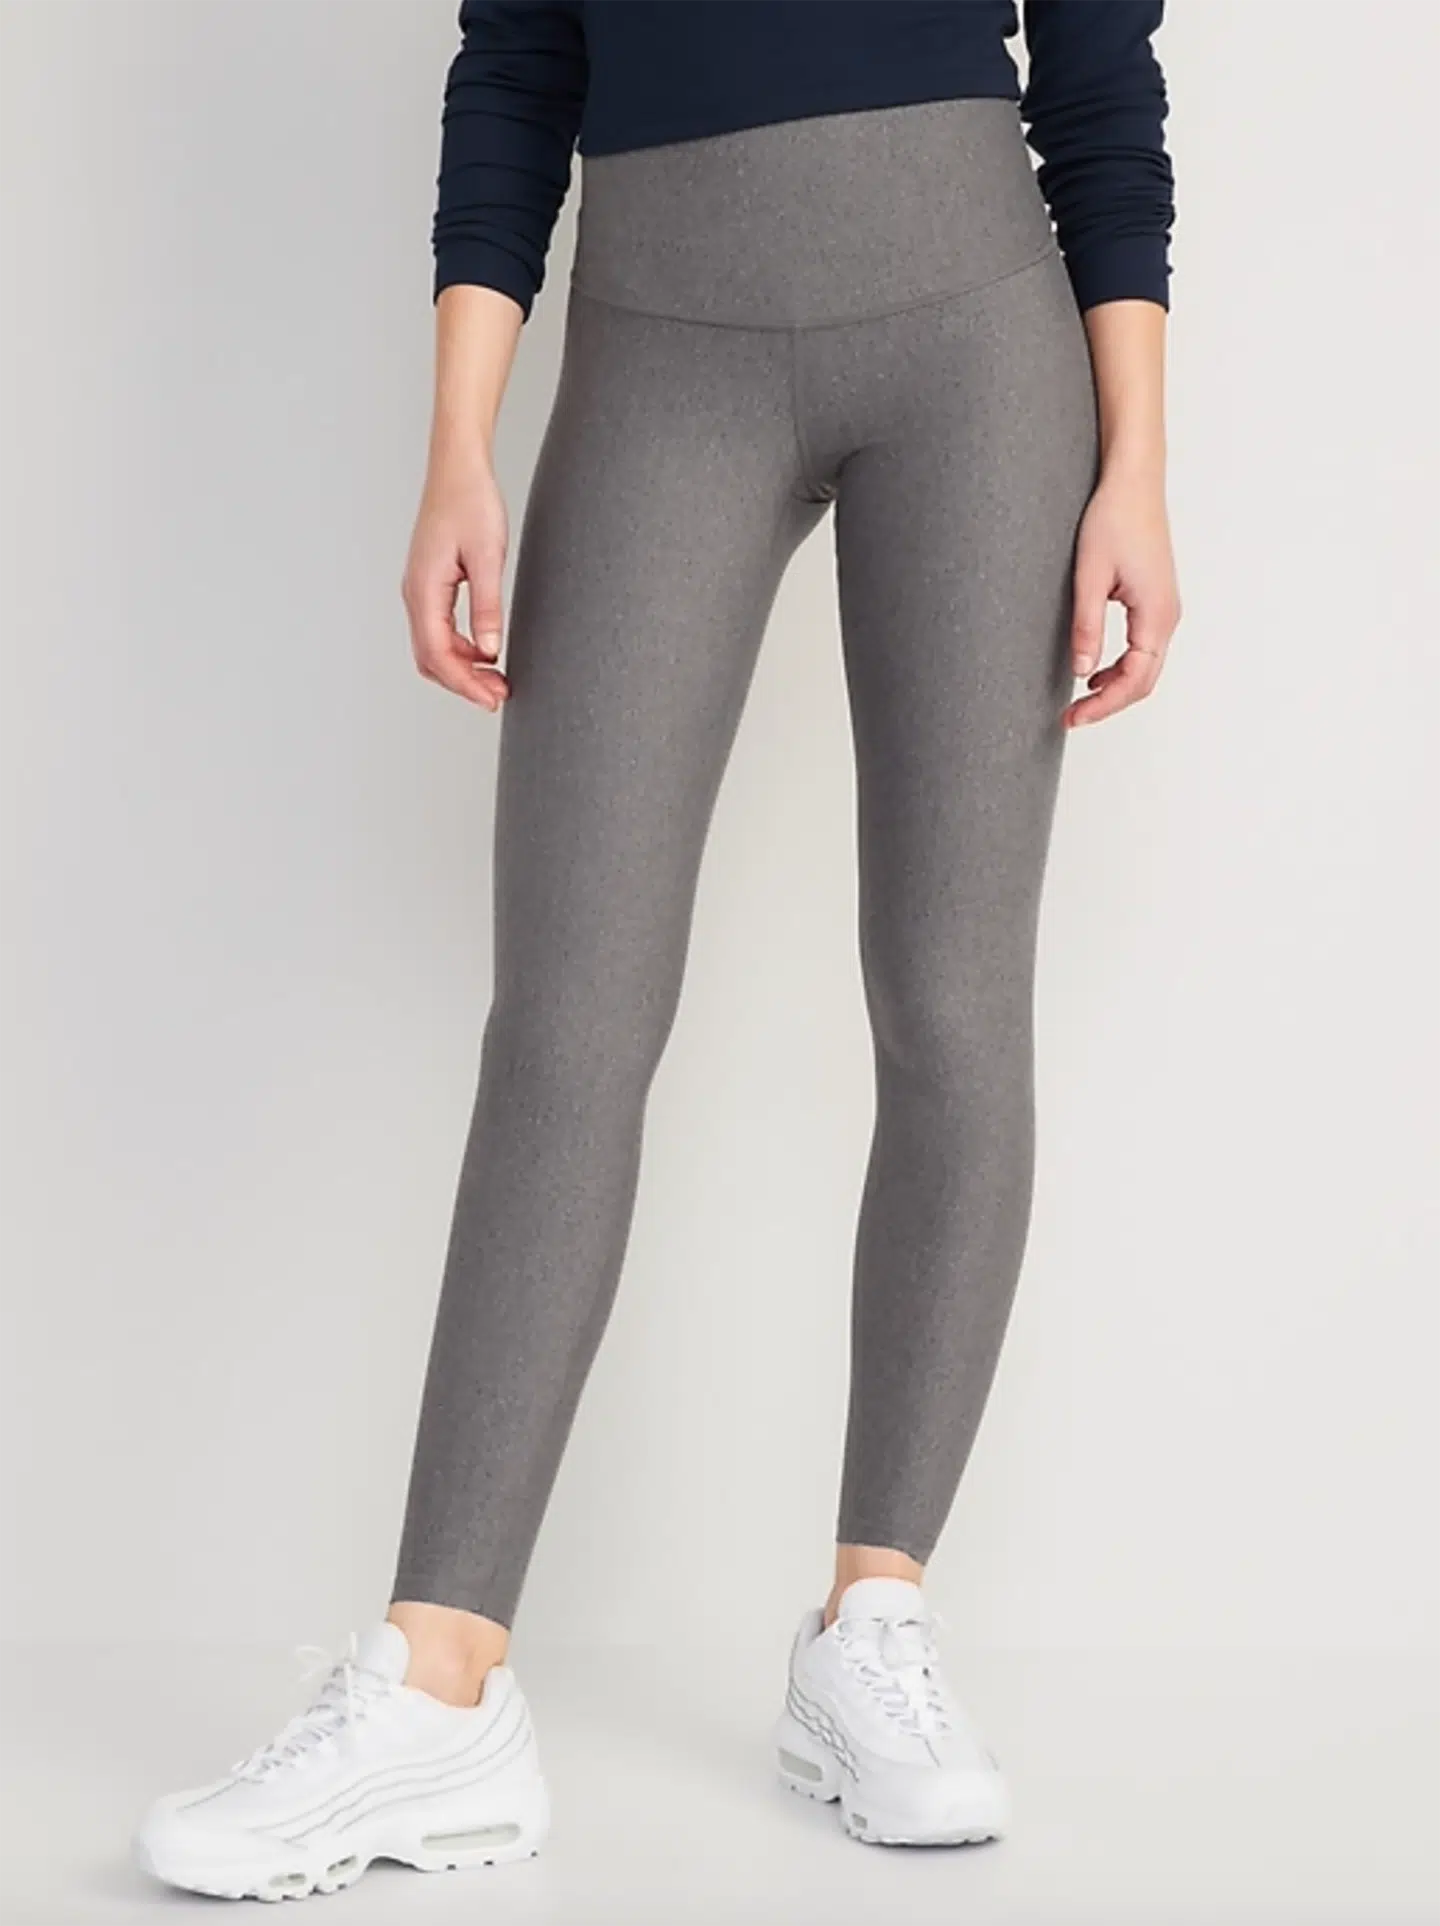 8 best Lululemon dupes, by fashion blogger What The Fab